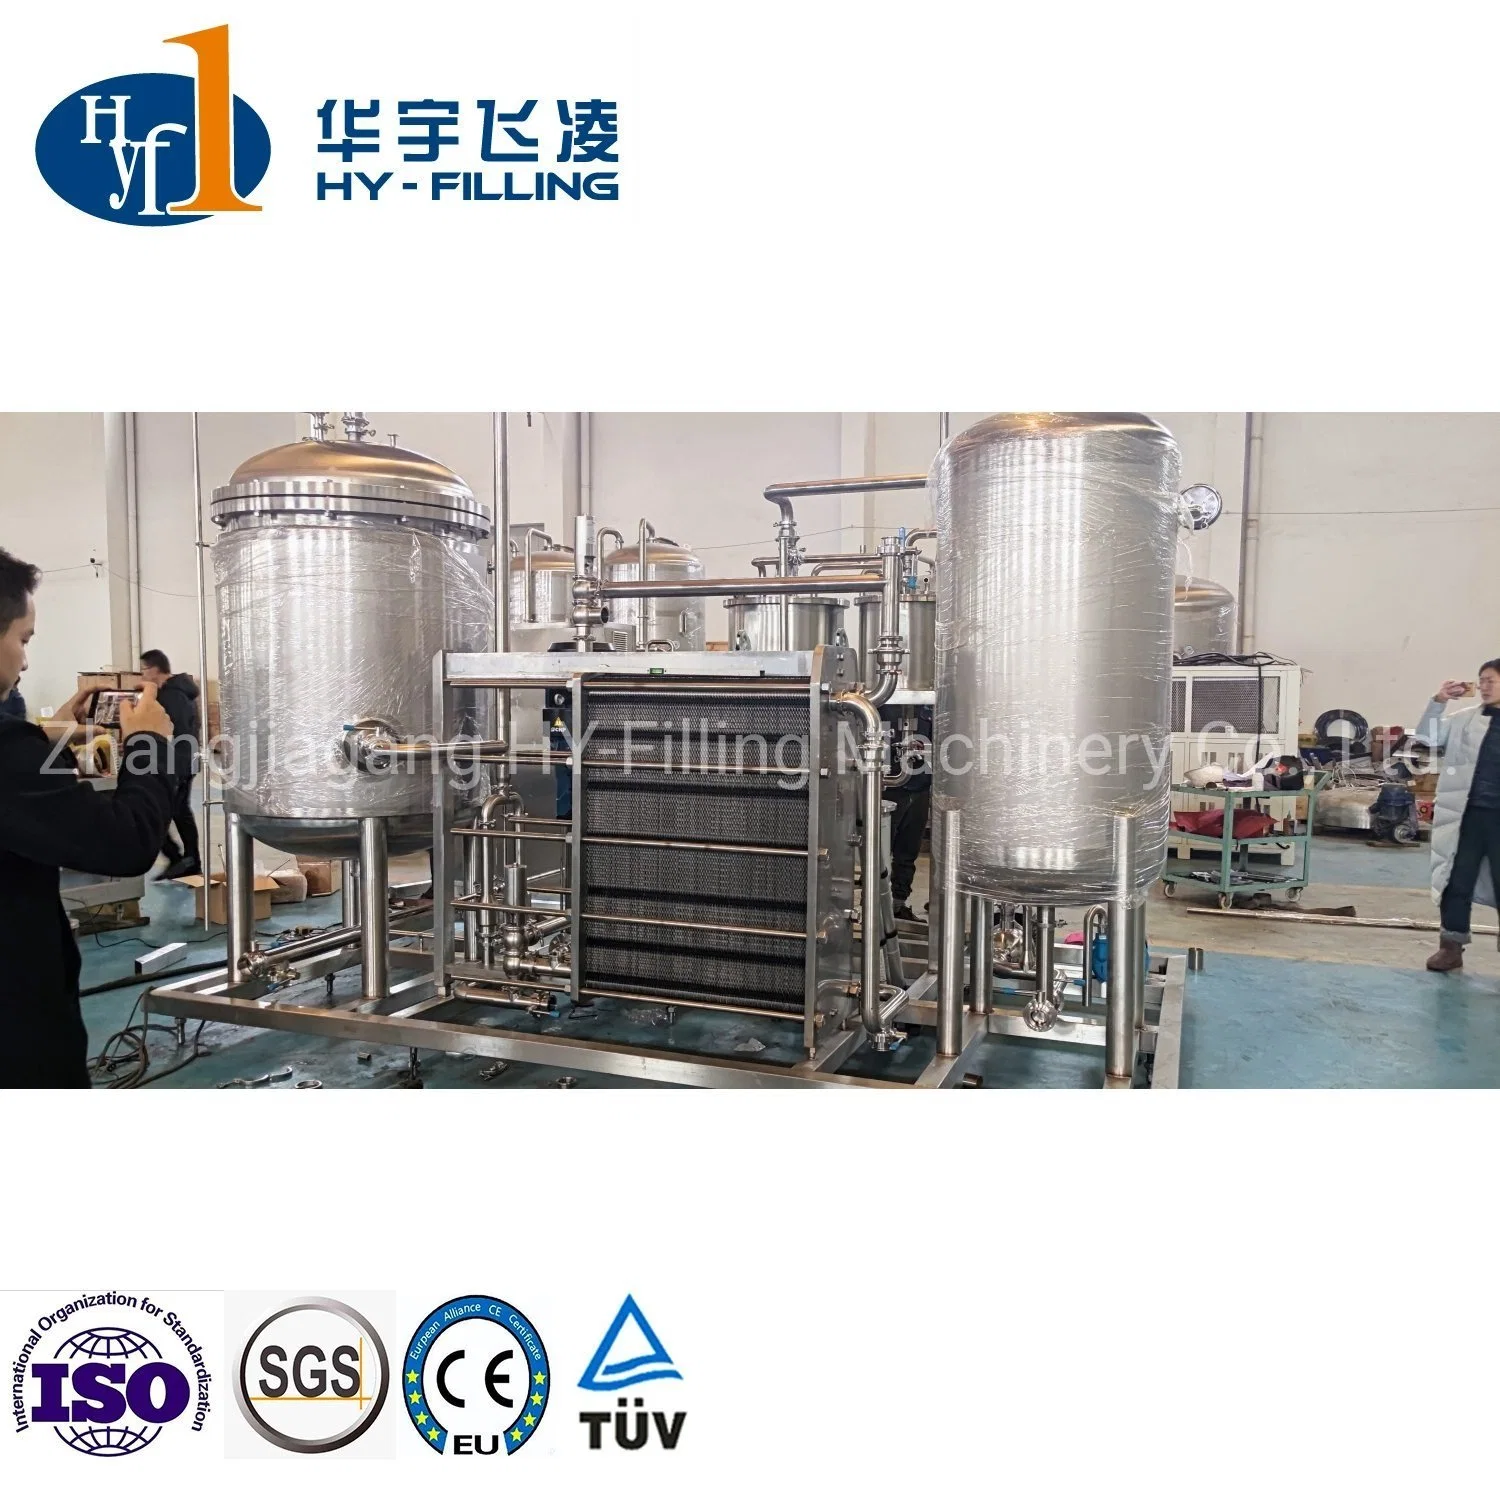 Carnonated Dirnk CO2 Mixer CSD Liquid Beverage Processing Mixing Filling Complete Machine Line